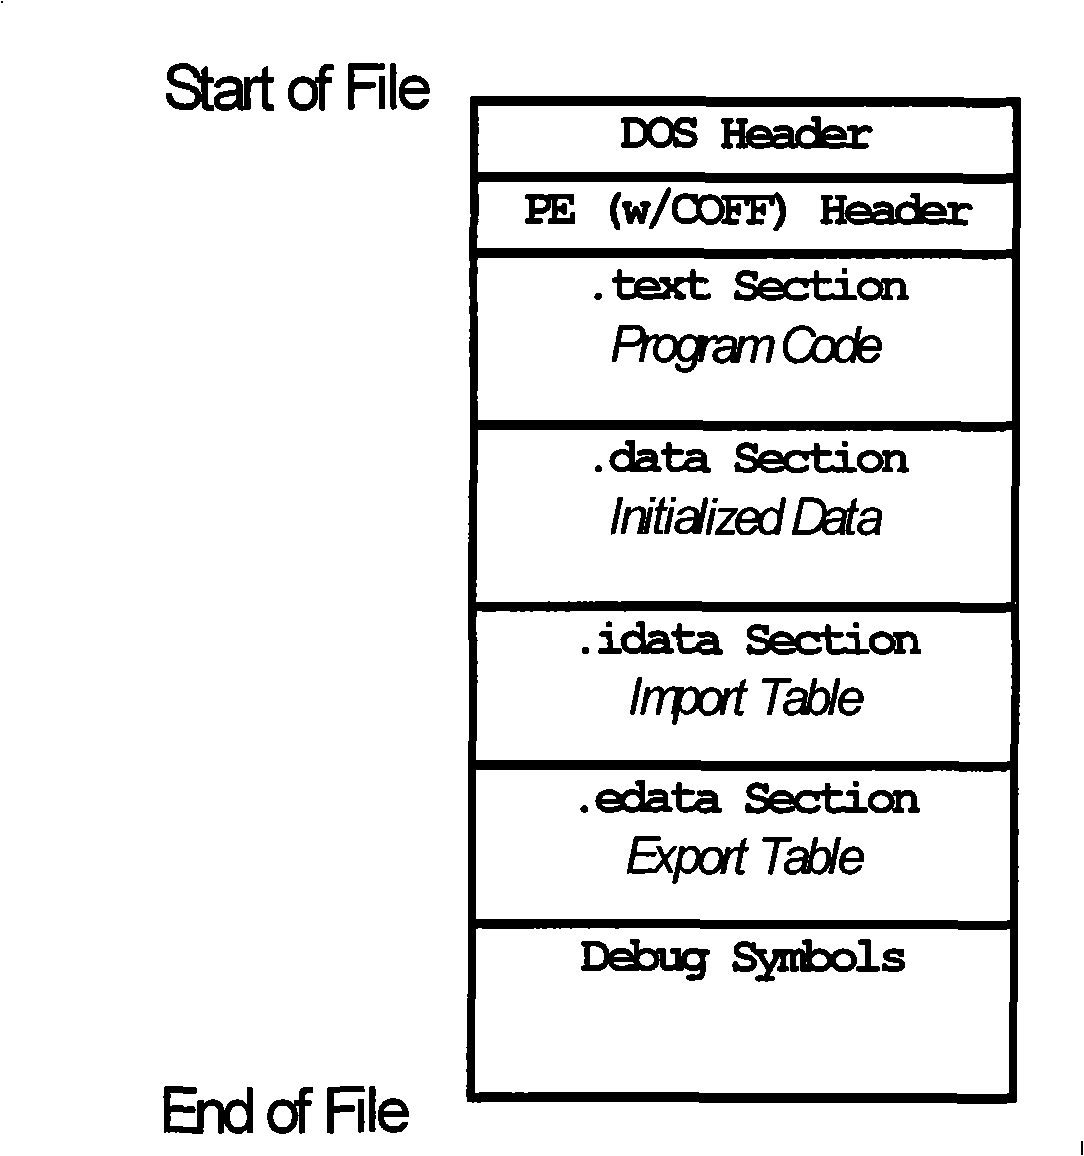 Migrating software use mode based on system call wrapping technology